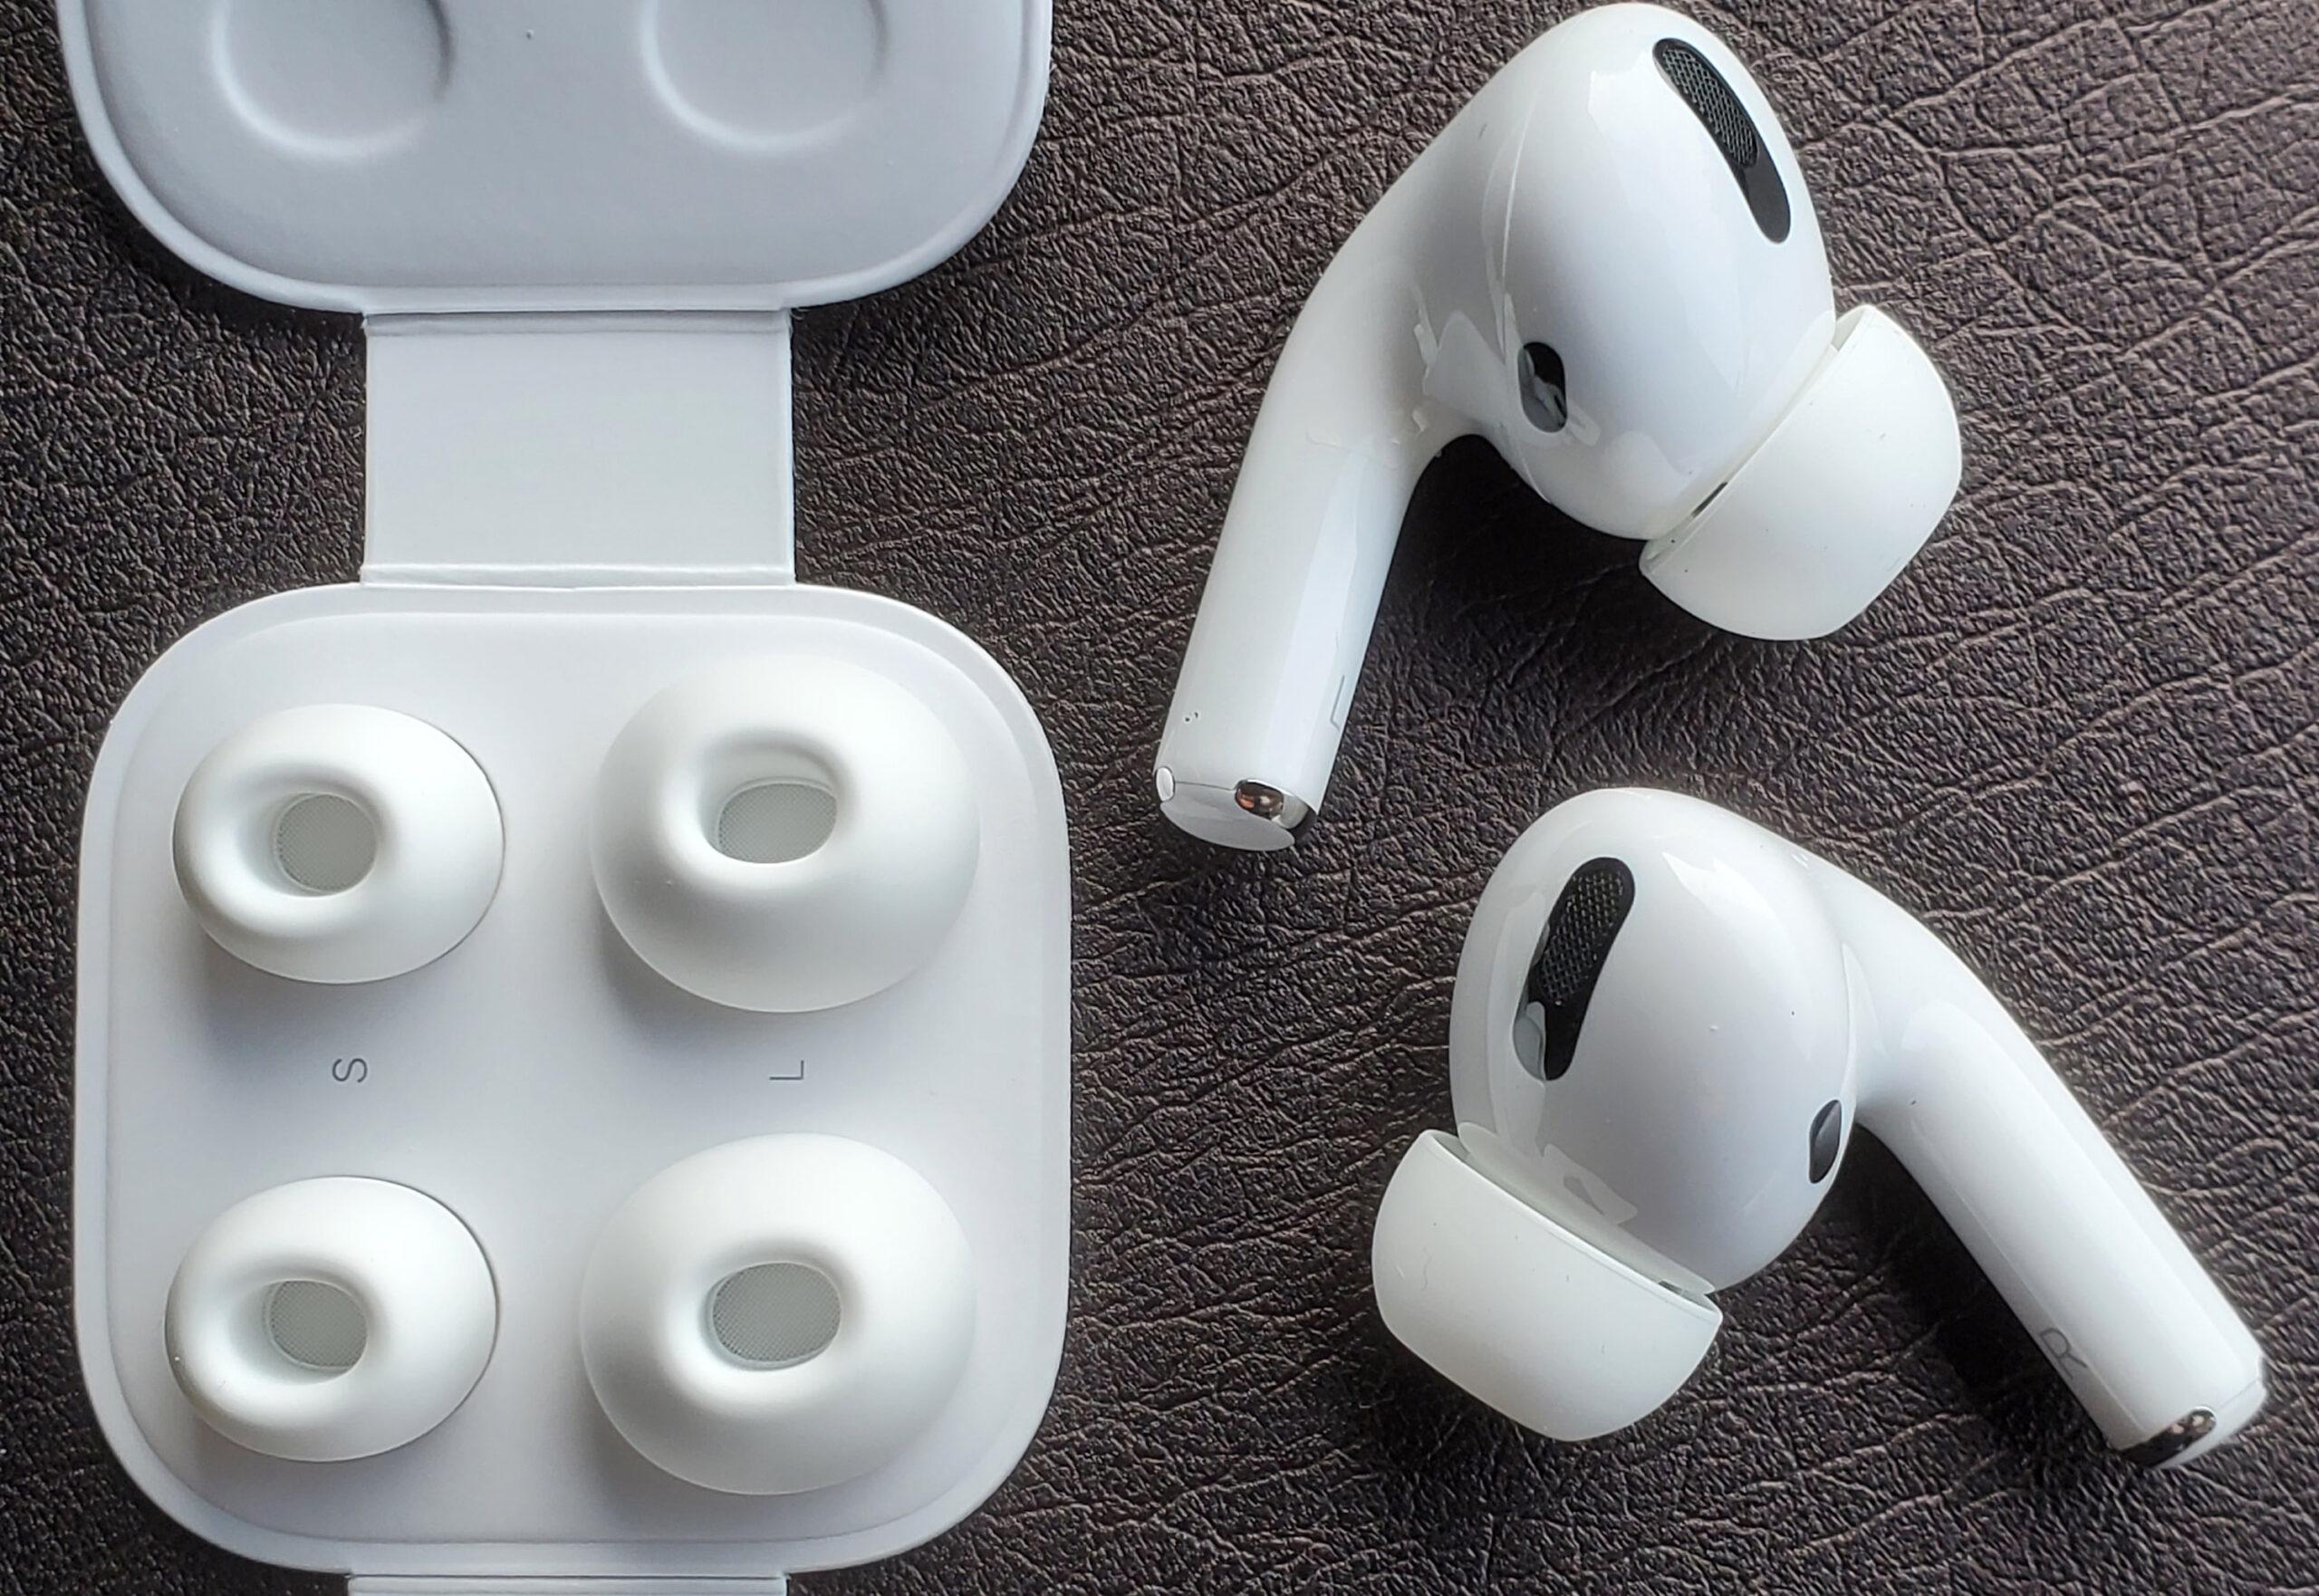 AirPods Pro and other spatial audio listening devices promise to change the way we listen to music. But how do they work? AirPods 167e6702 airpods pro scaled